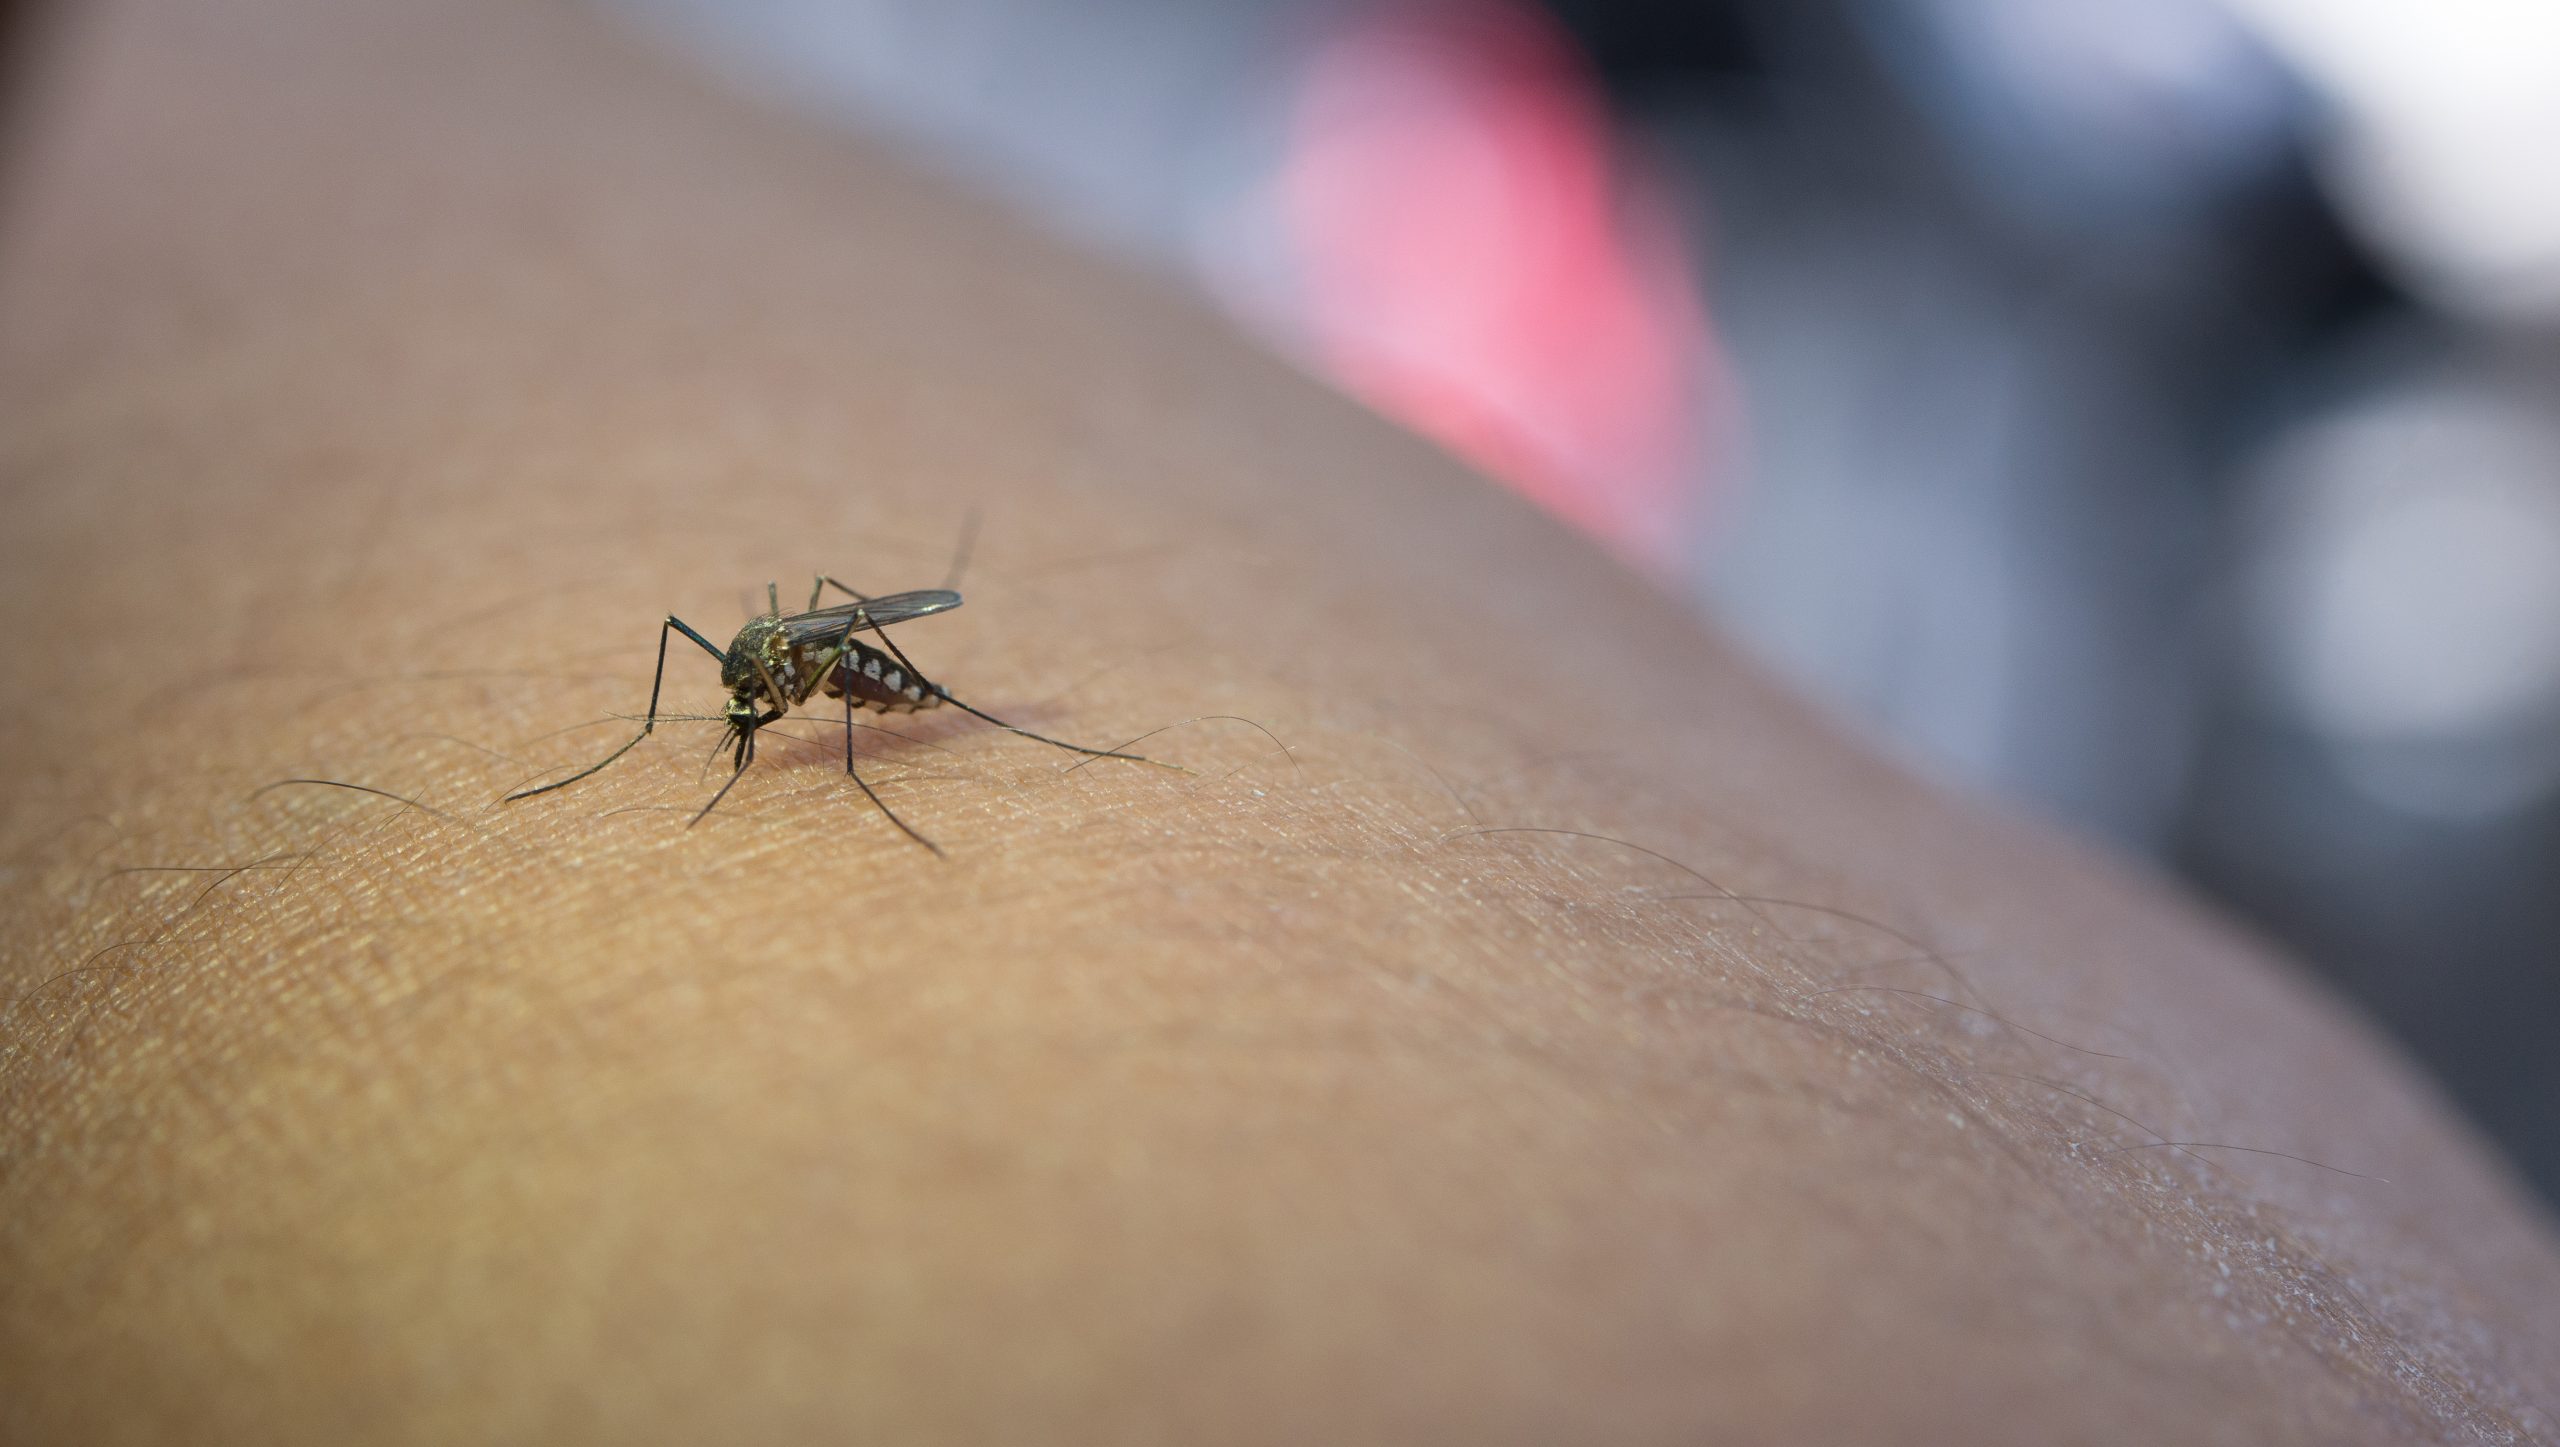 Malaria Prevention: How to Keep Mosquitoes Out of Your Space